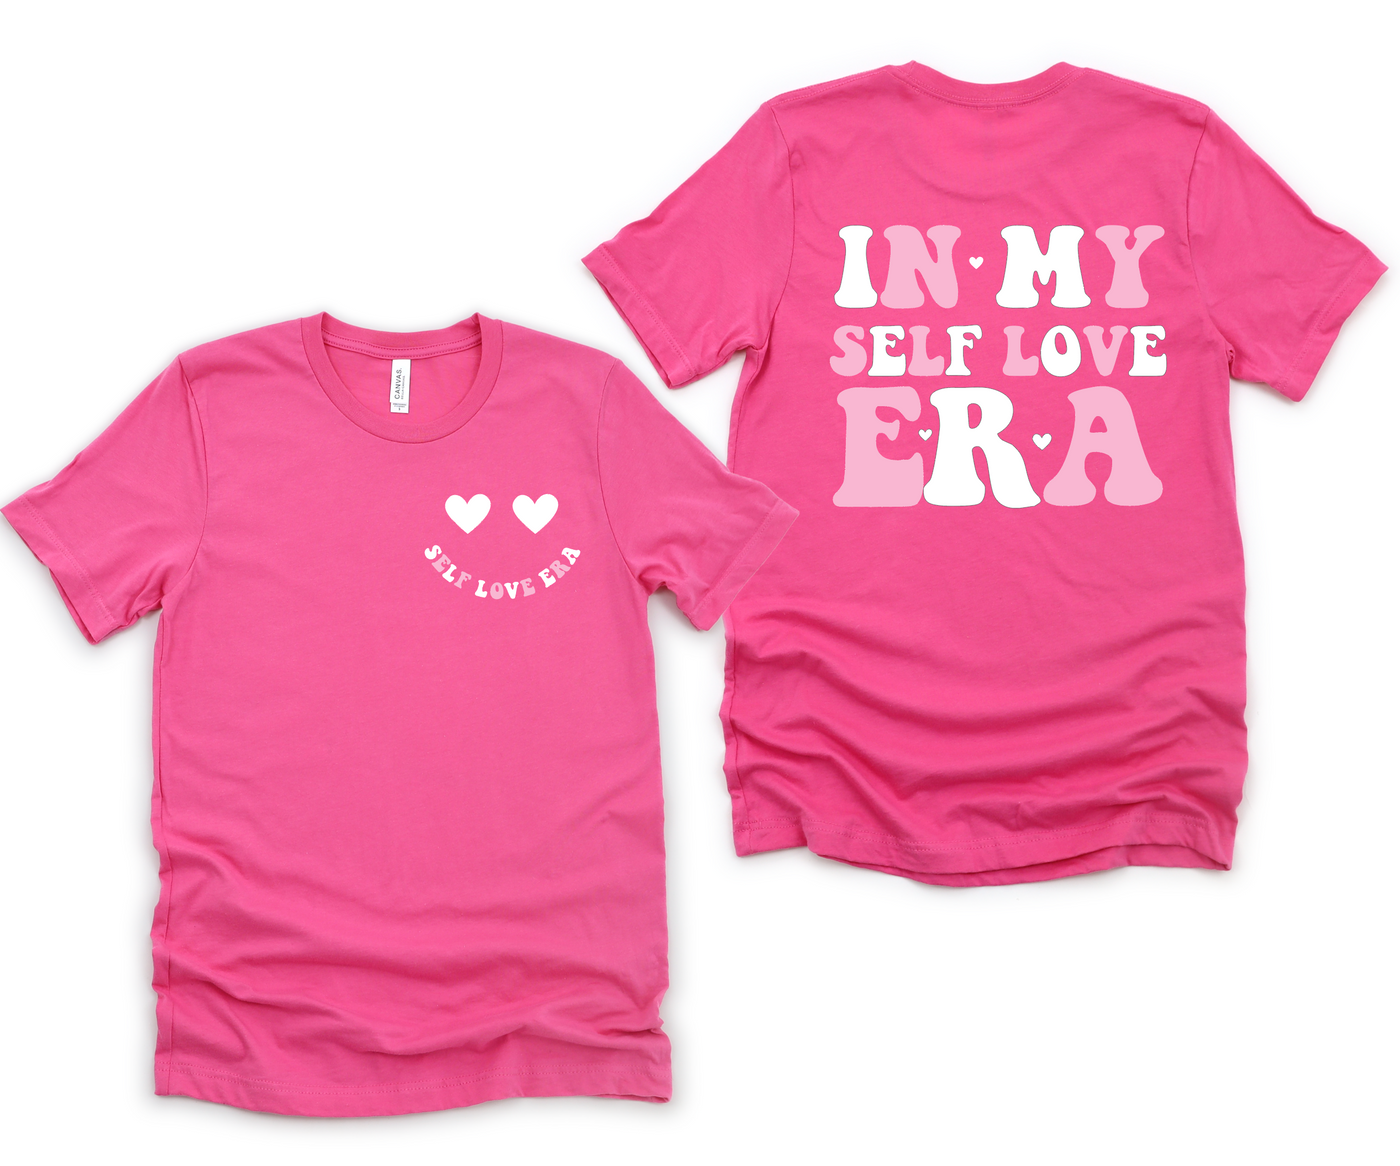 Self Love Era Graphic T-shirt in Pink - Southern Soul Collectives